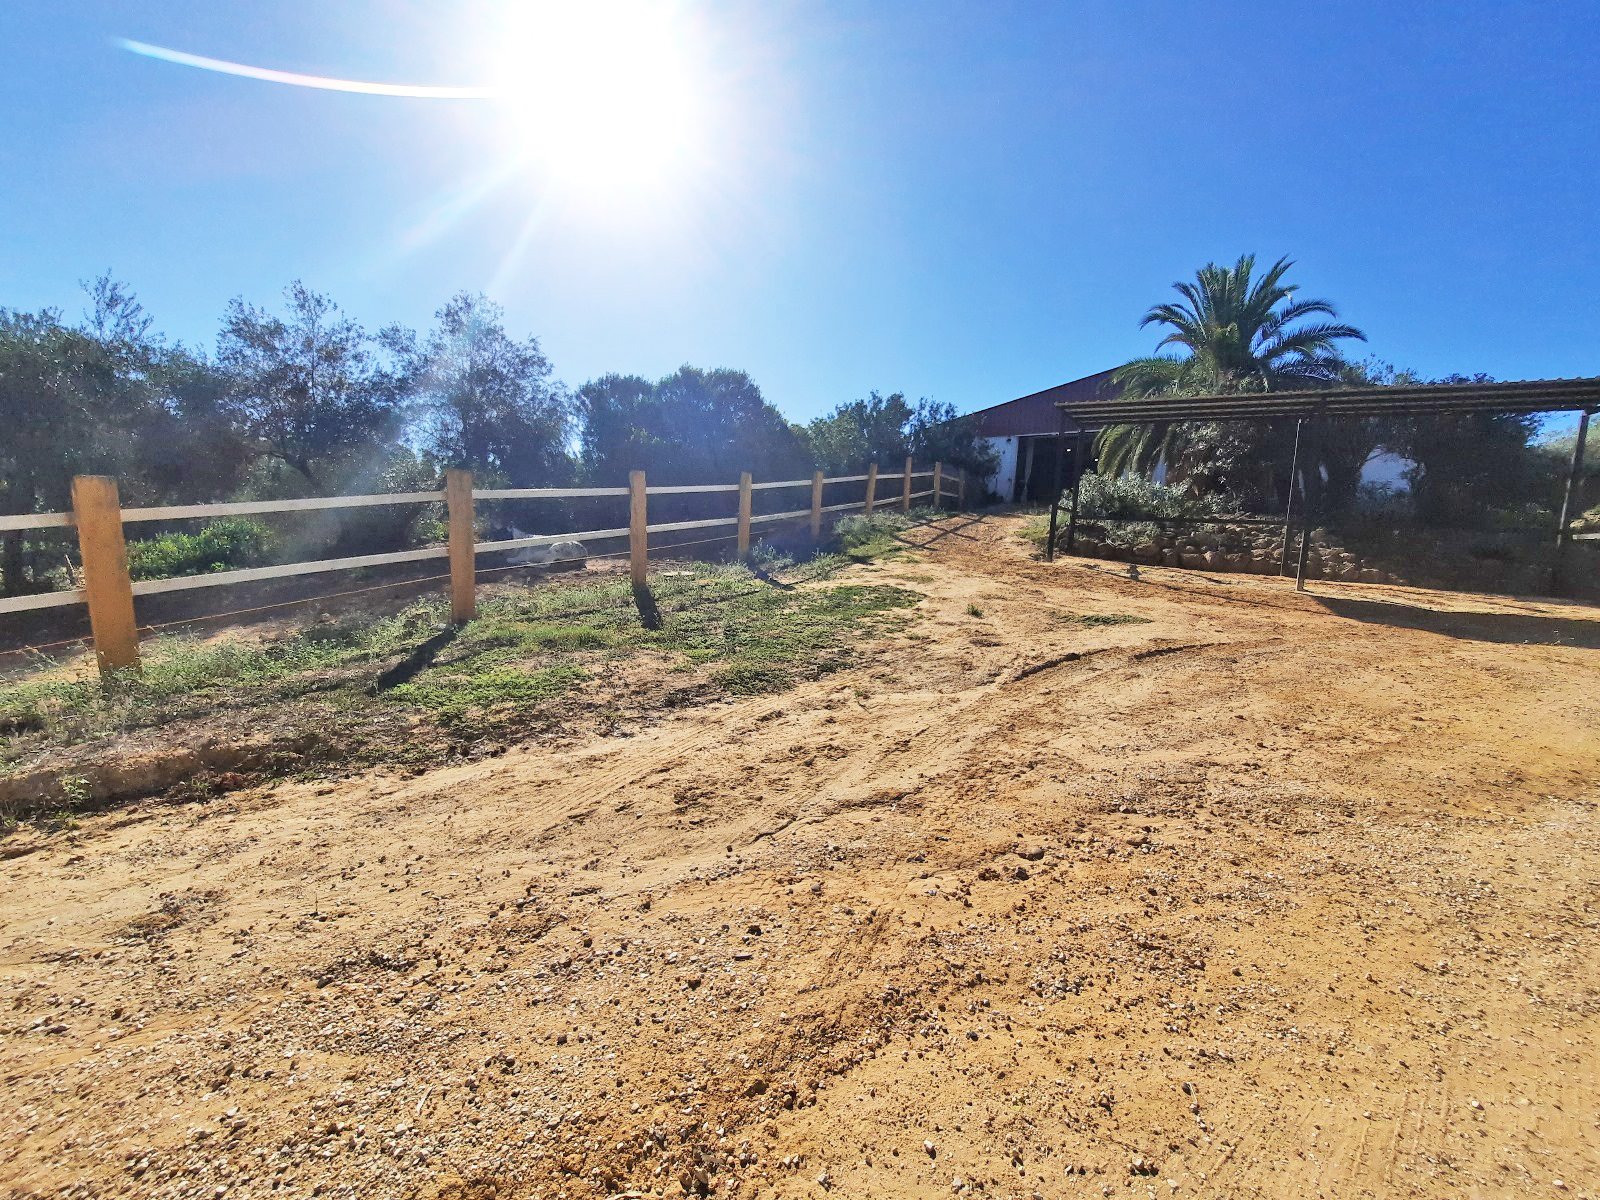 2409ER Andalusia, Alcala de Guadaira - Finca with stables and riding hall for sale